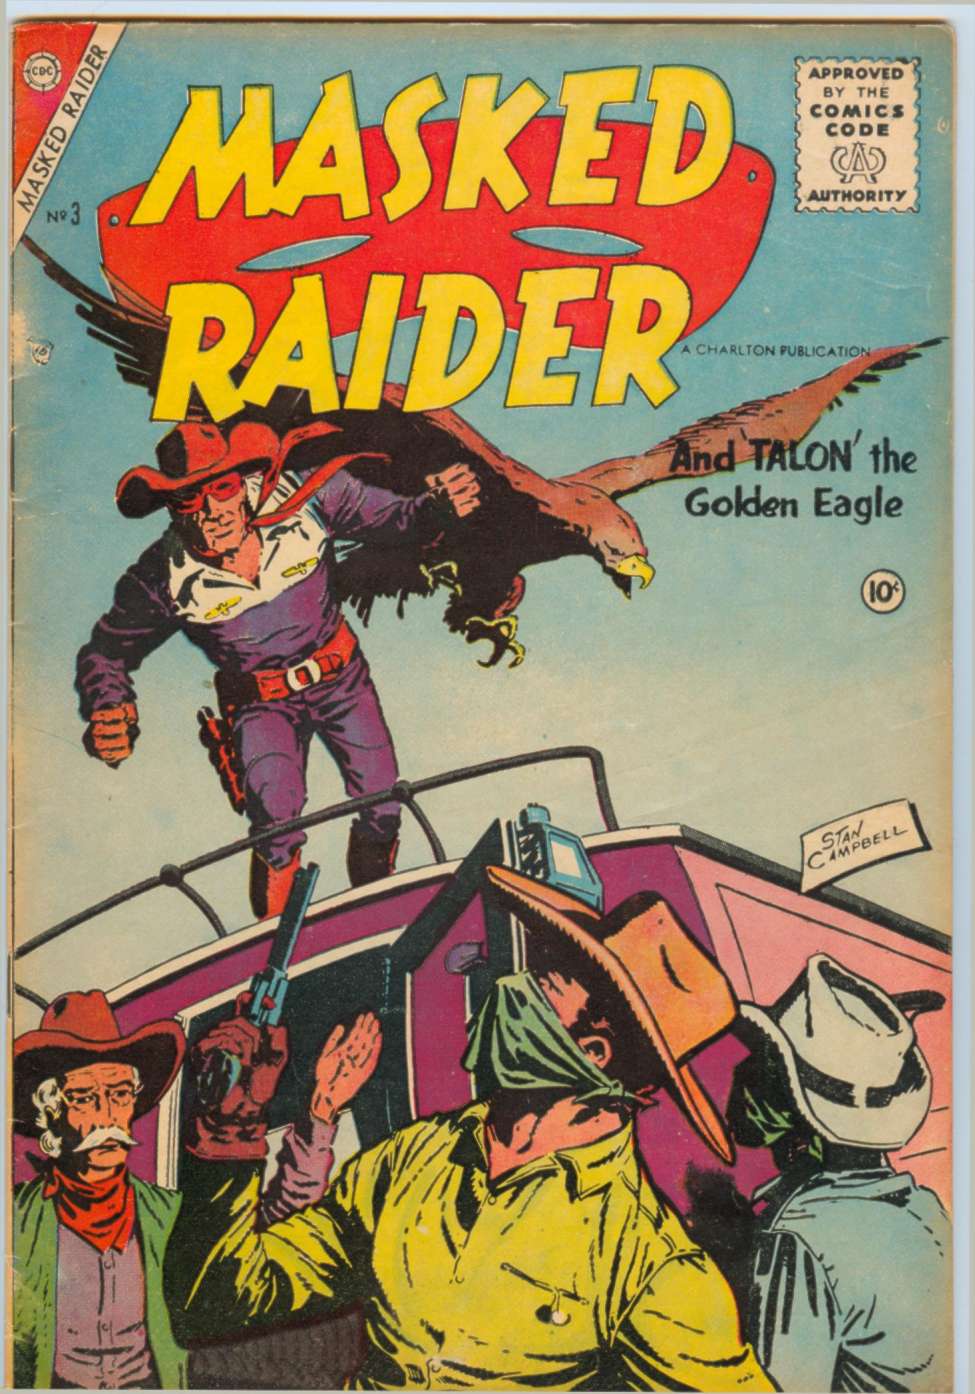 Comic Book Cover For Masked Raider 3 - Version 1